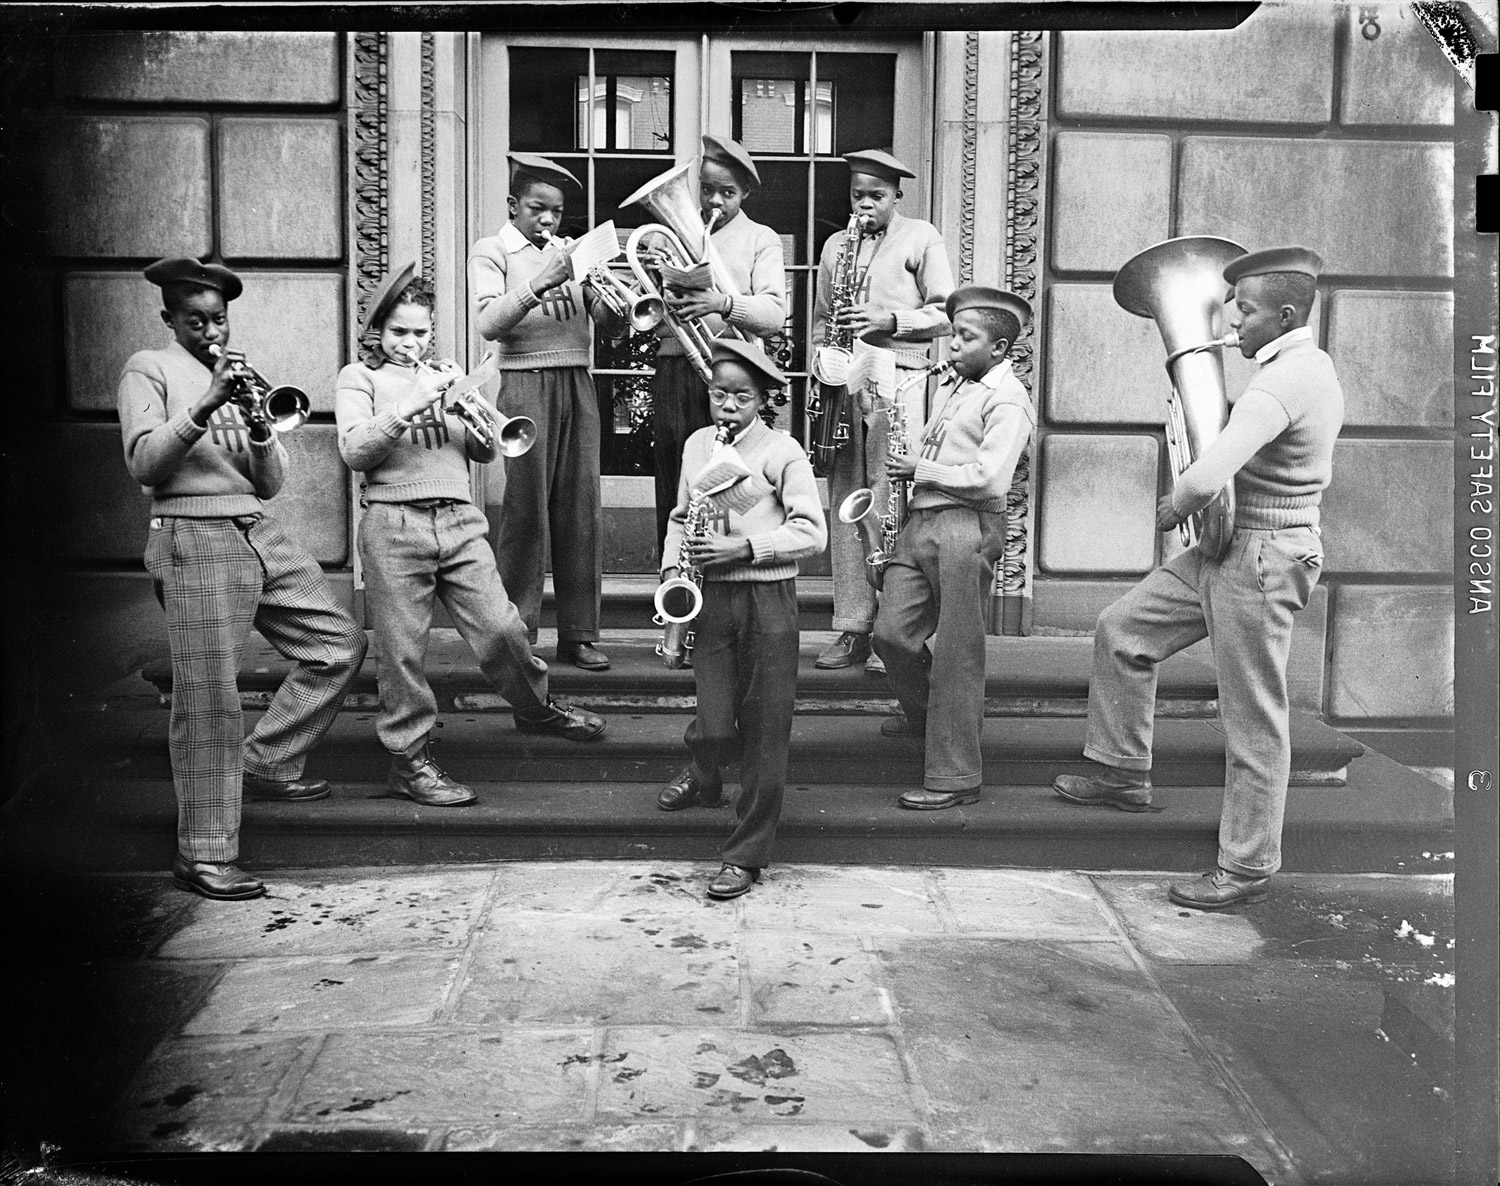 A group of boys, possibly from Herron Hill School, playing brass instruments on steps, 1938-1945.